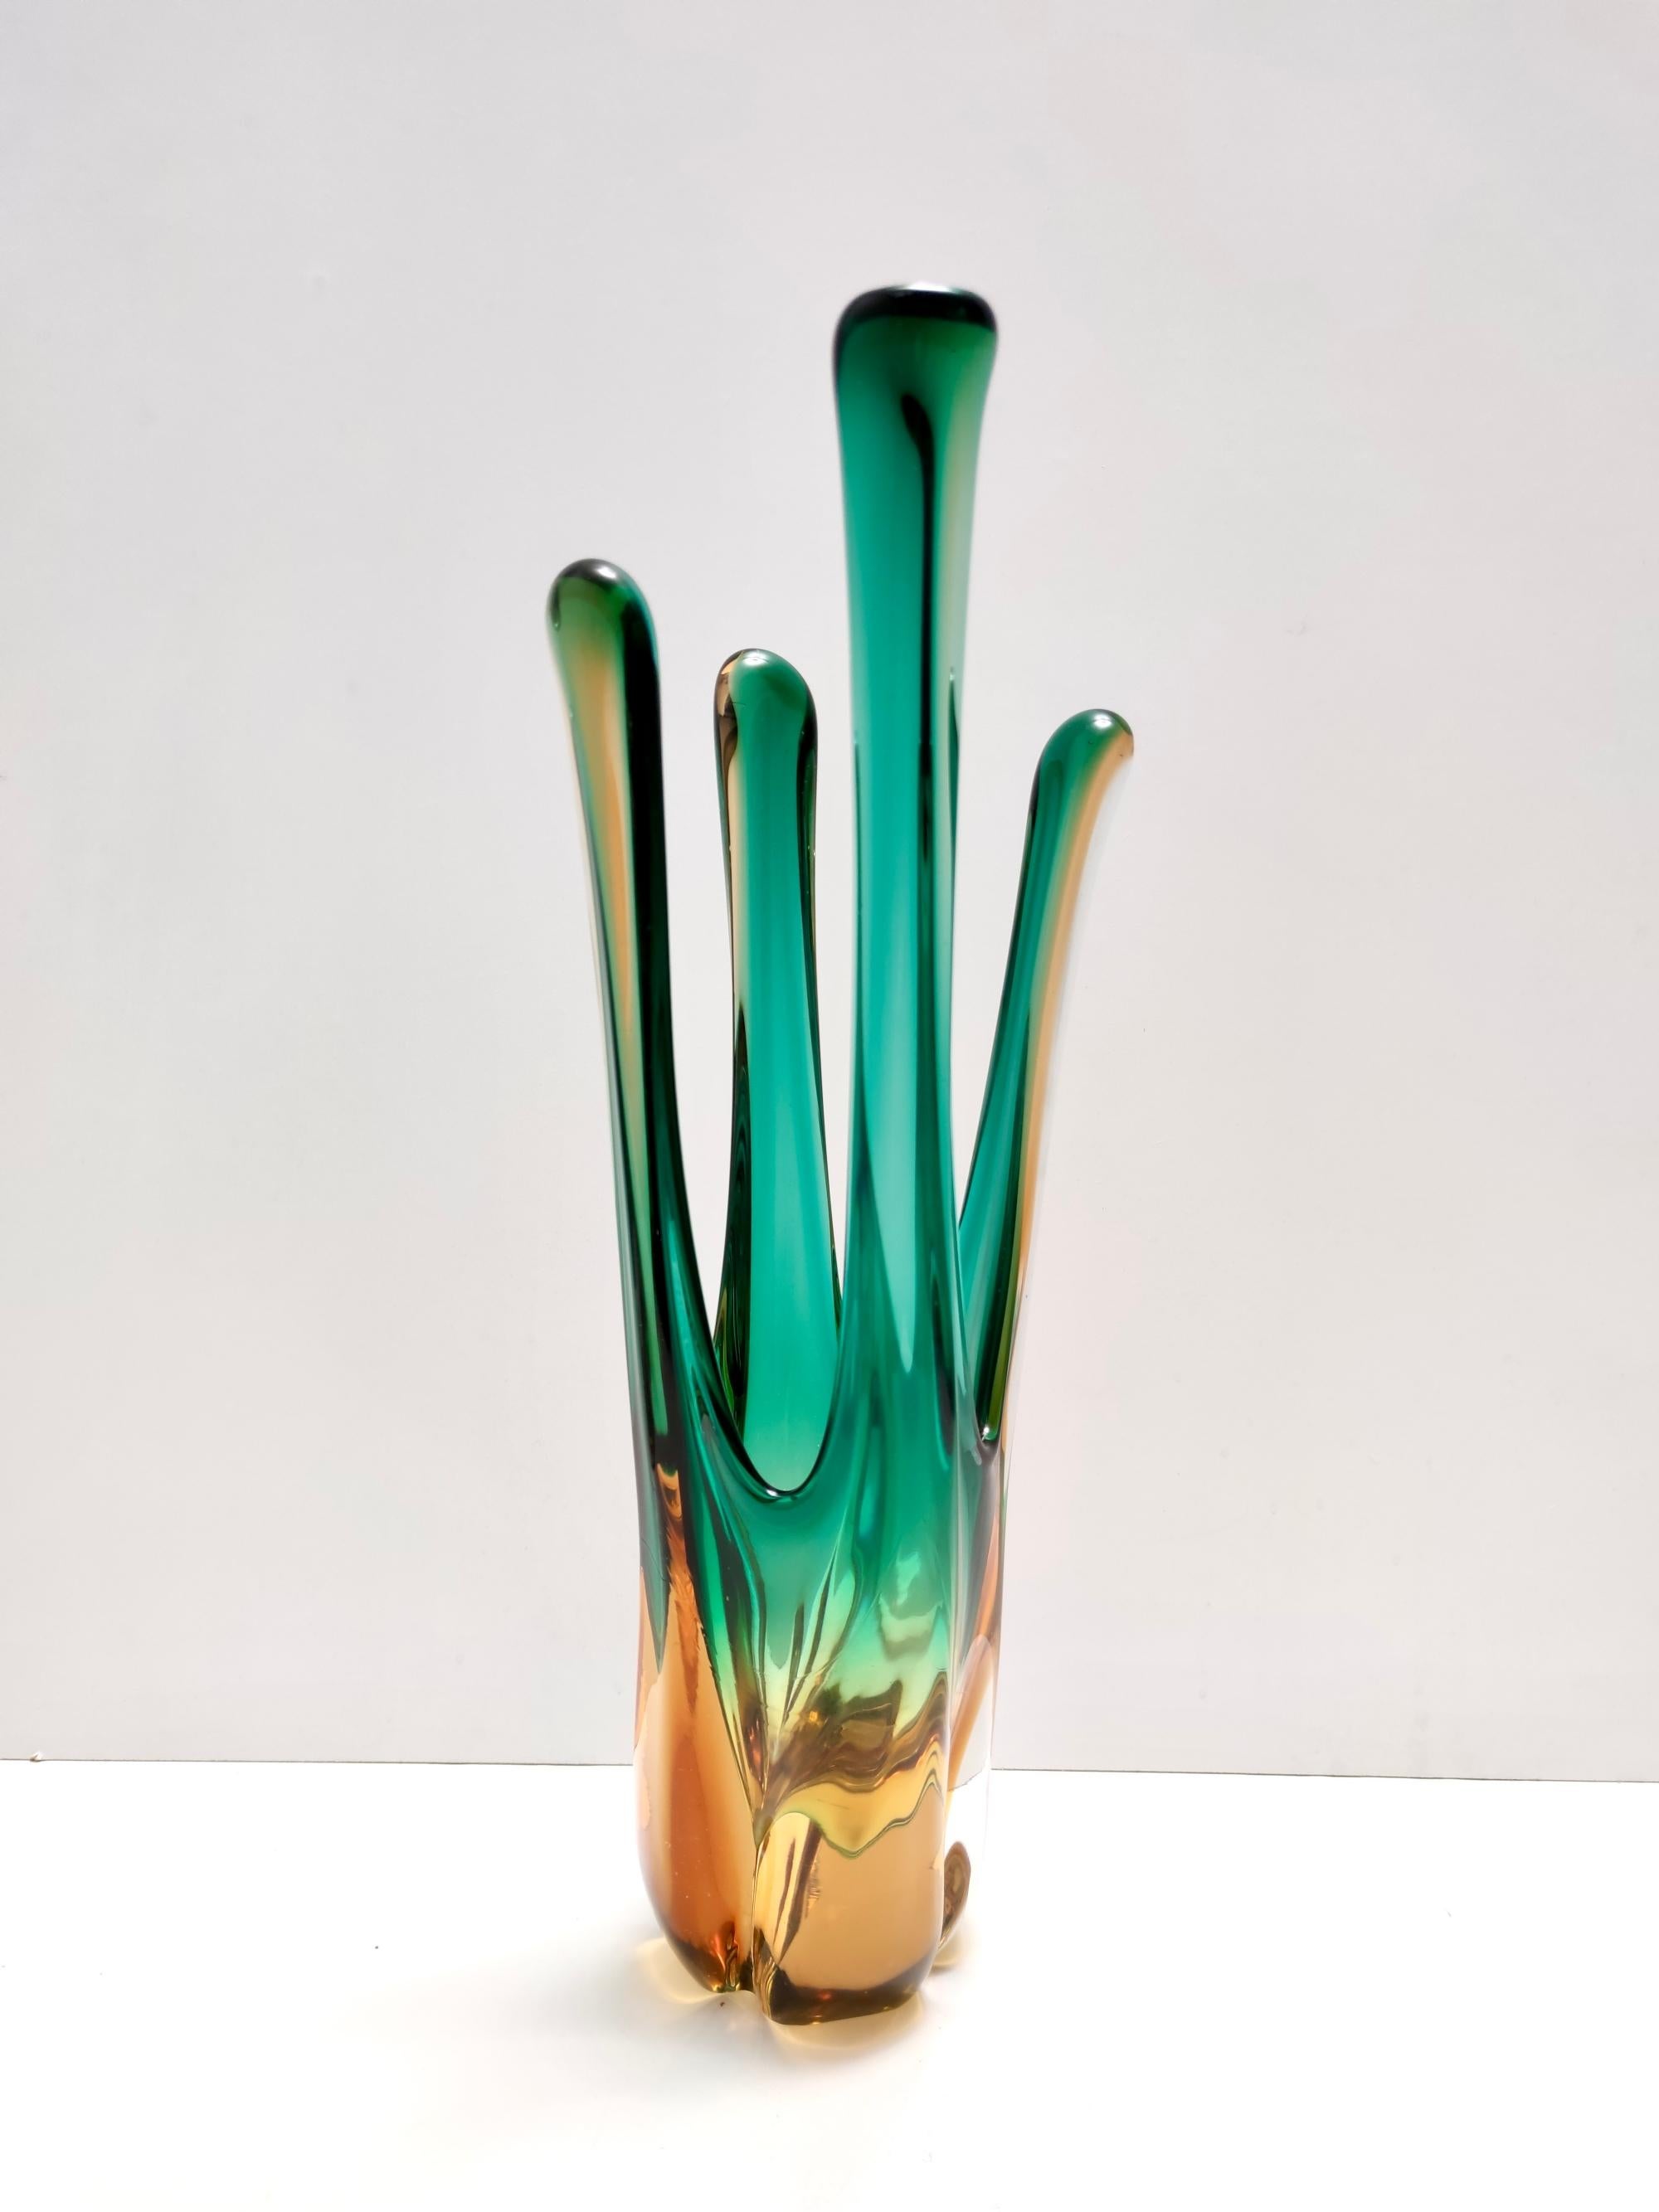 Stunning Green and Amber Murano Glass Centerpiece Vase, Italy In Excellent Condition For Sale In Bresso, Lombardy